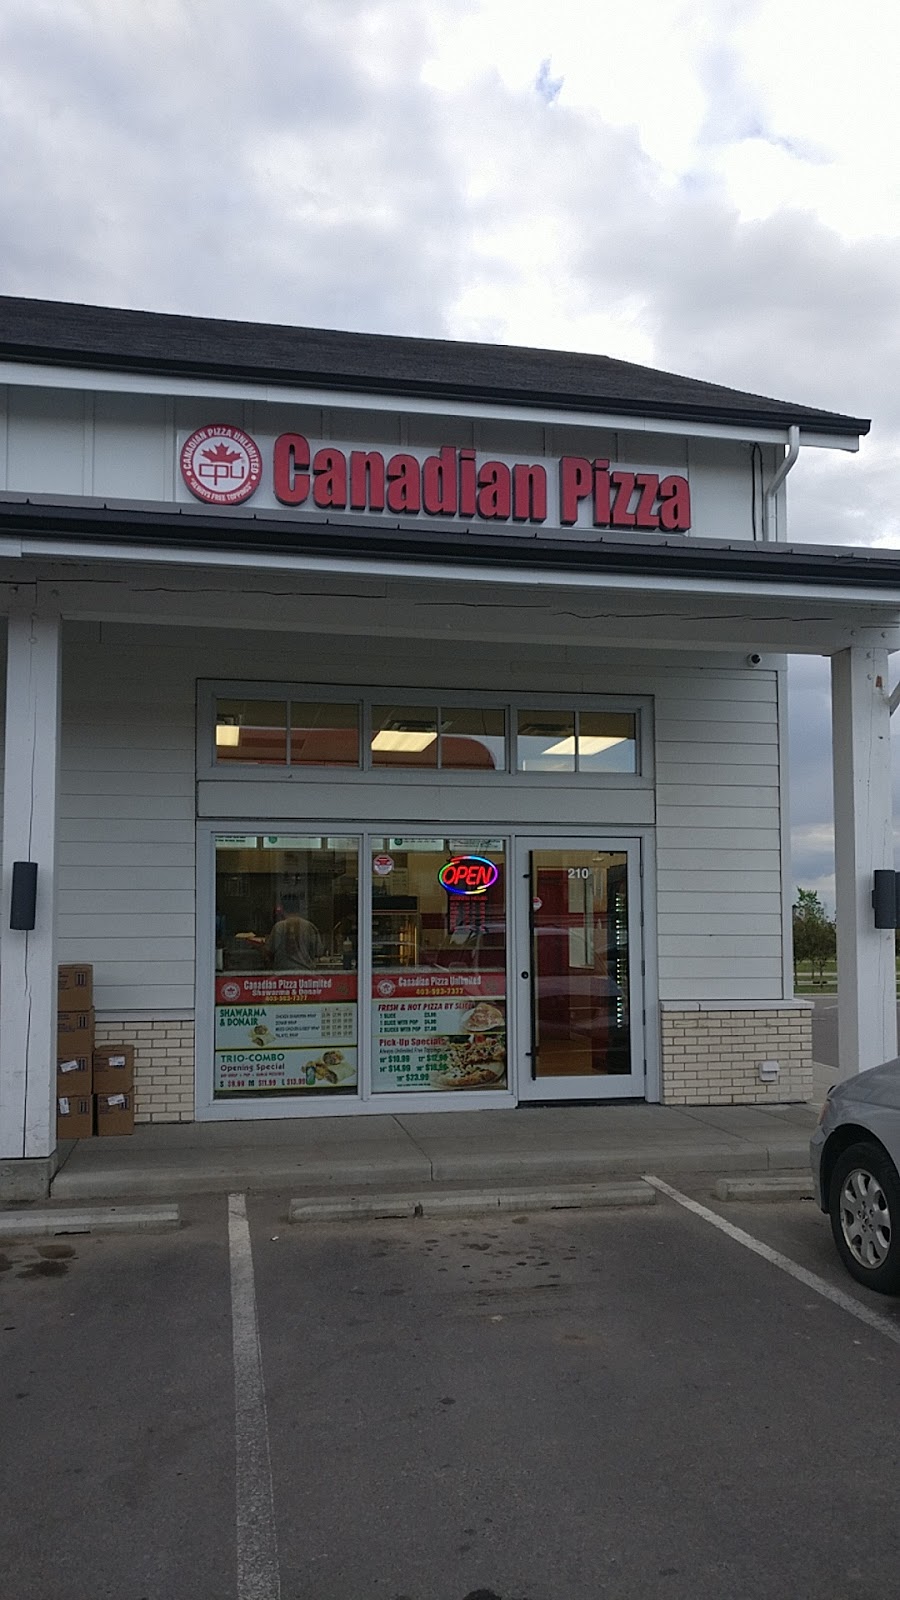 Canadian Pizza Unlimited | 210 - 1035 New Brighton Dr SE, Calgary, AB T2Z 0W1, Canada | Phone: (403) 523-7377